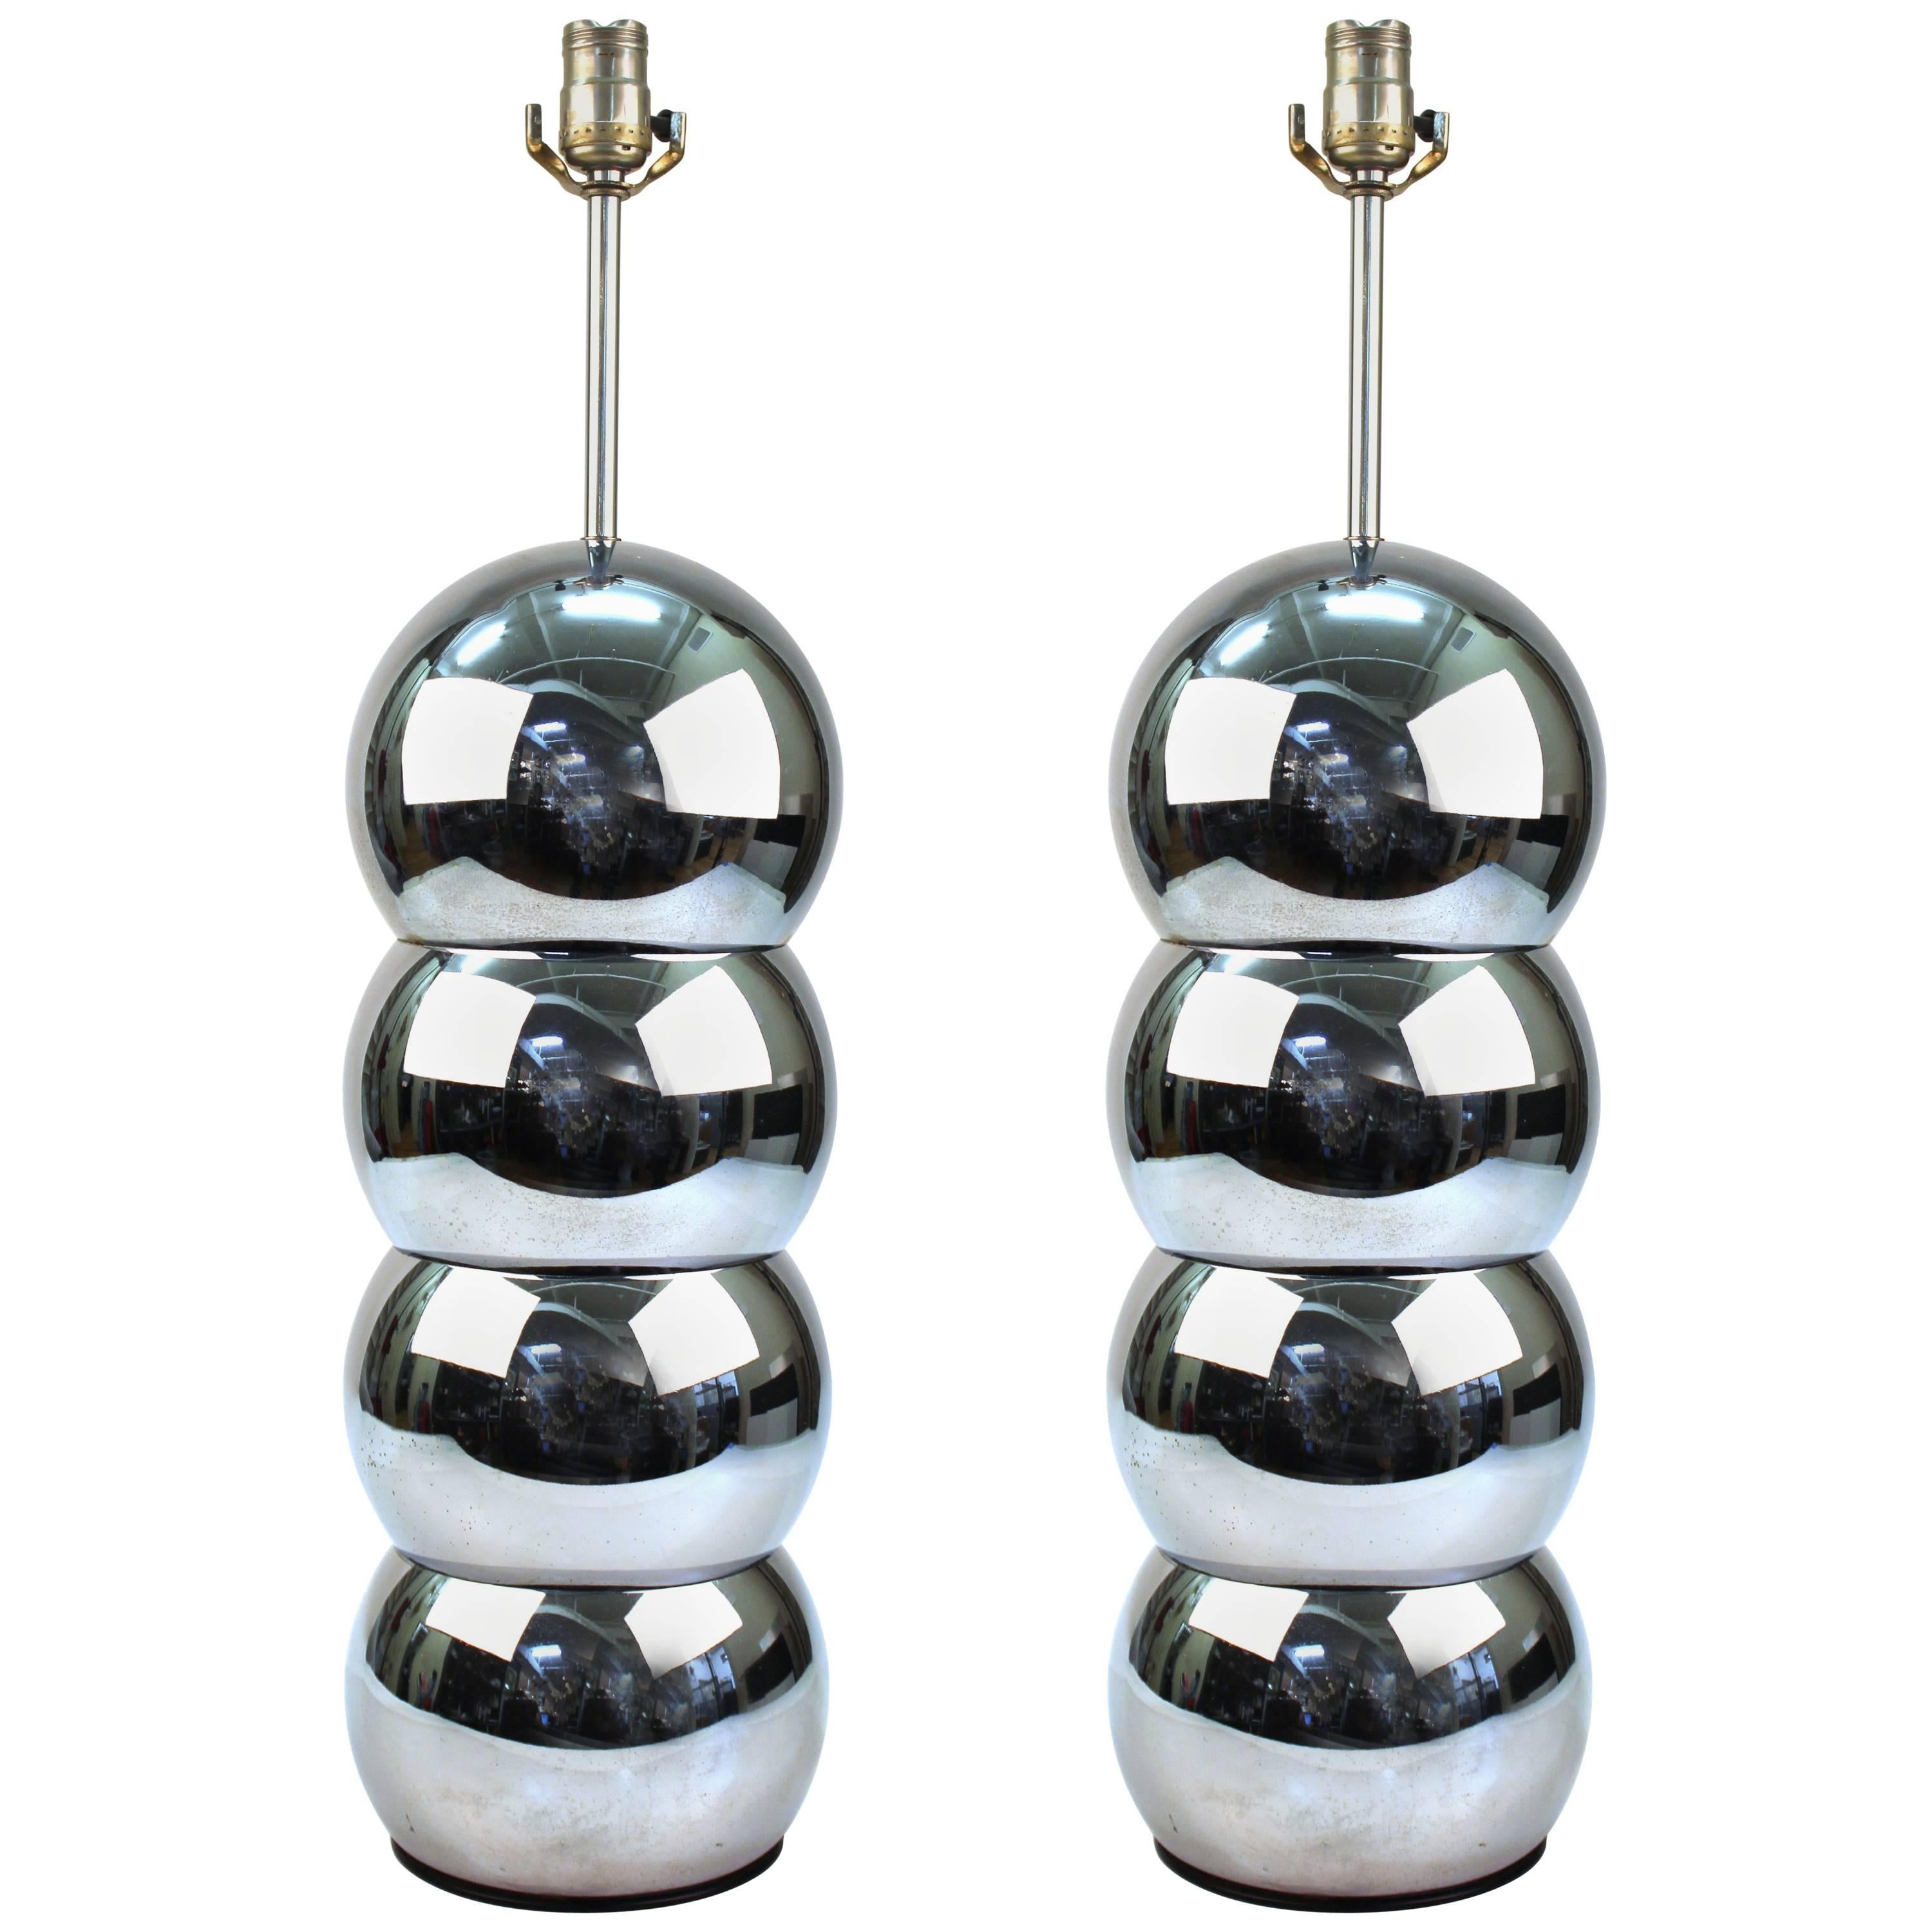 Table Lamps with Stacked Orb Bodies in Chrome